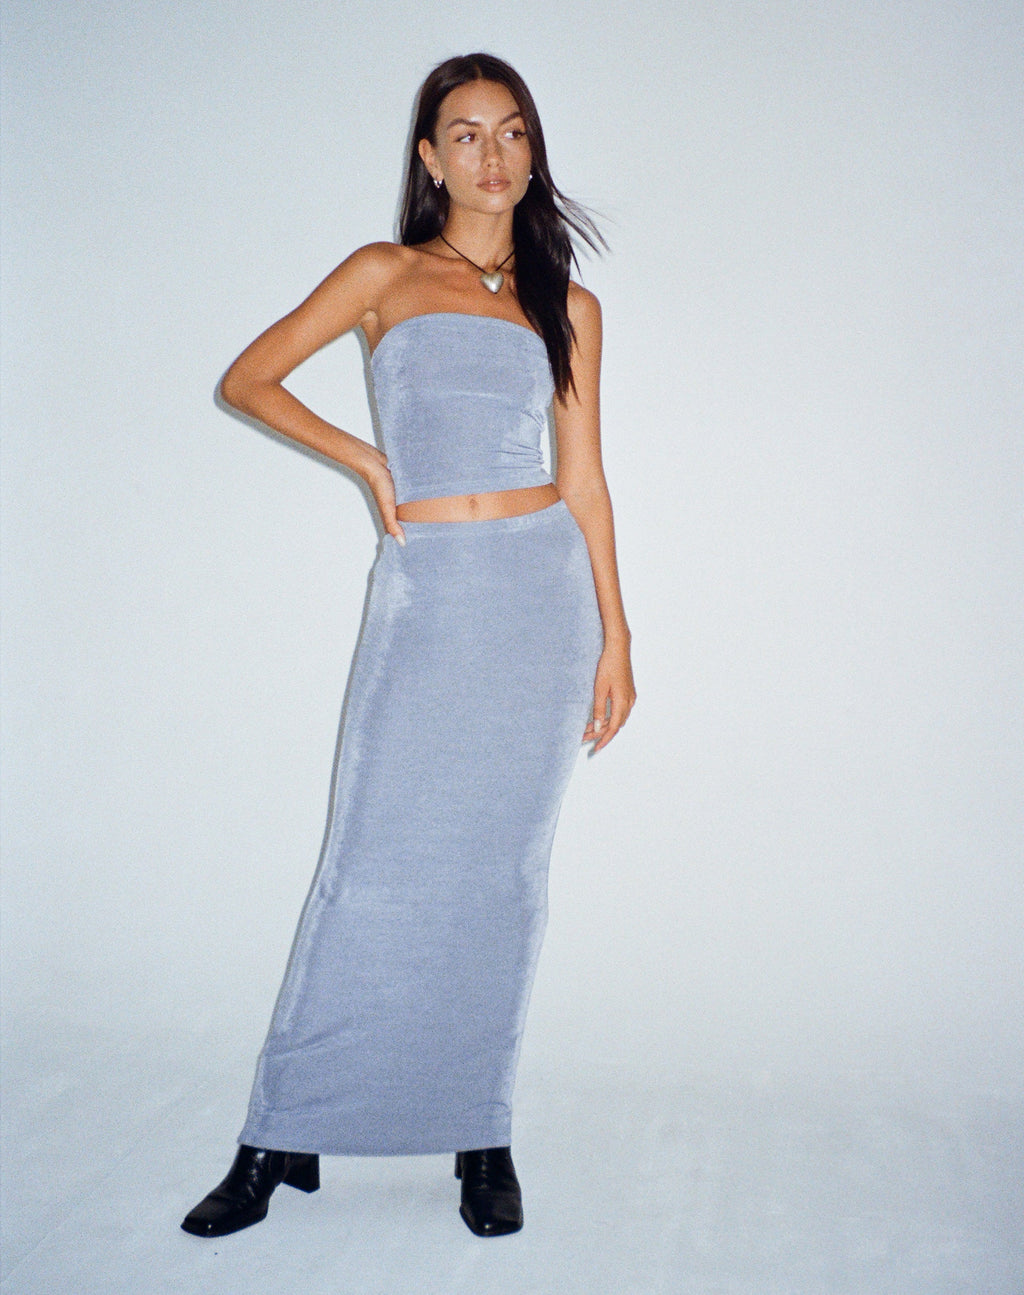 Tulus Low Rise Maxi Skirt in Slate Blue